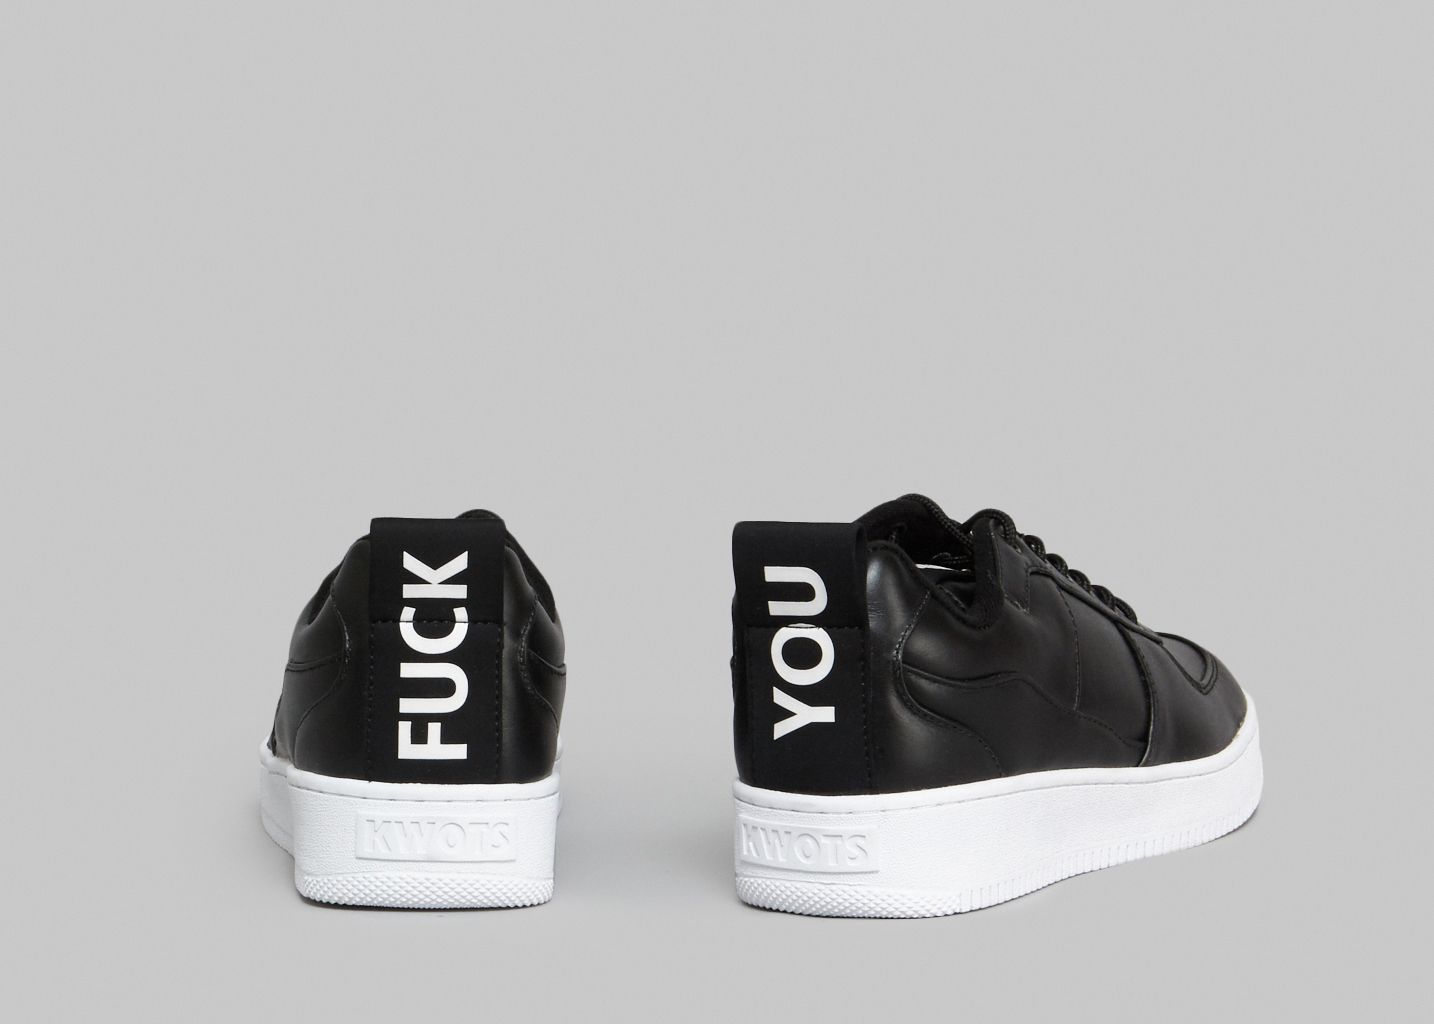 Sneakers Master Fuck/You - Kwots